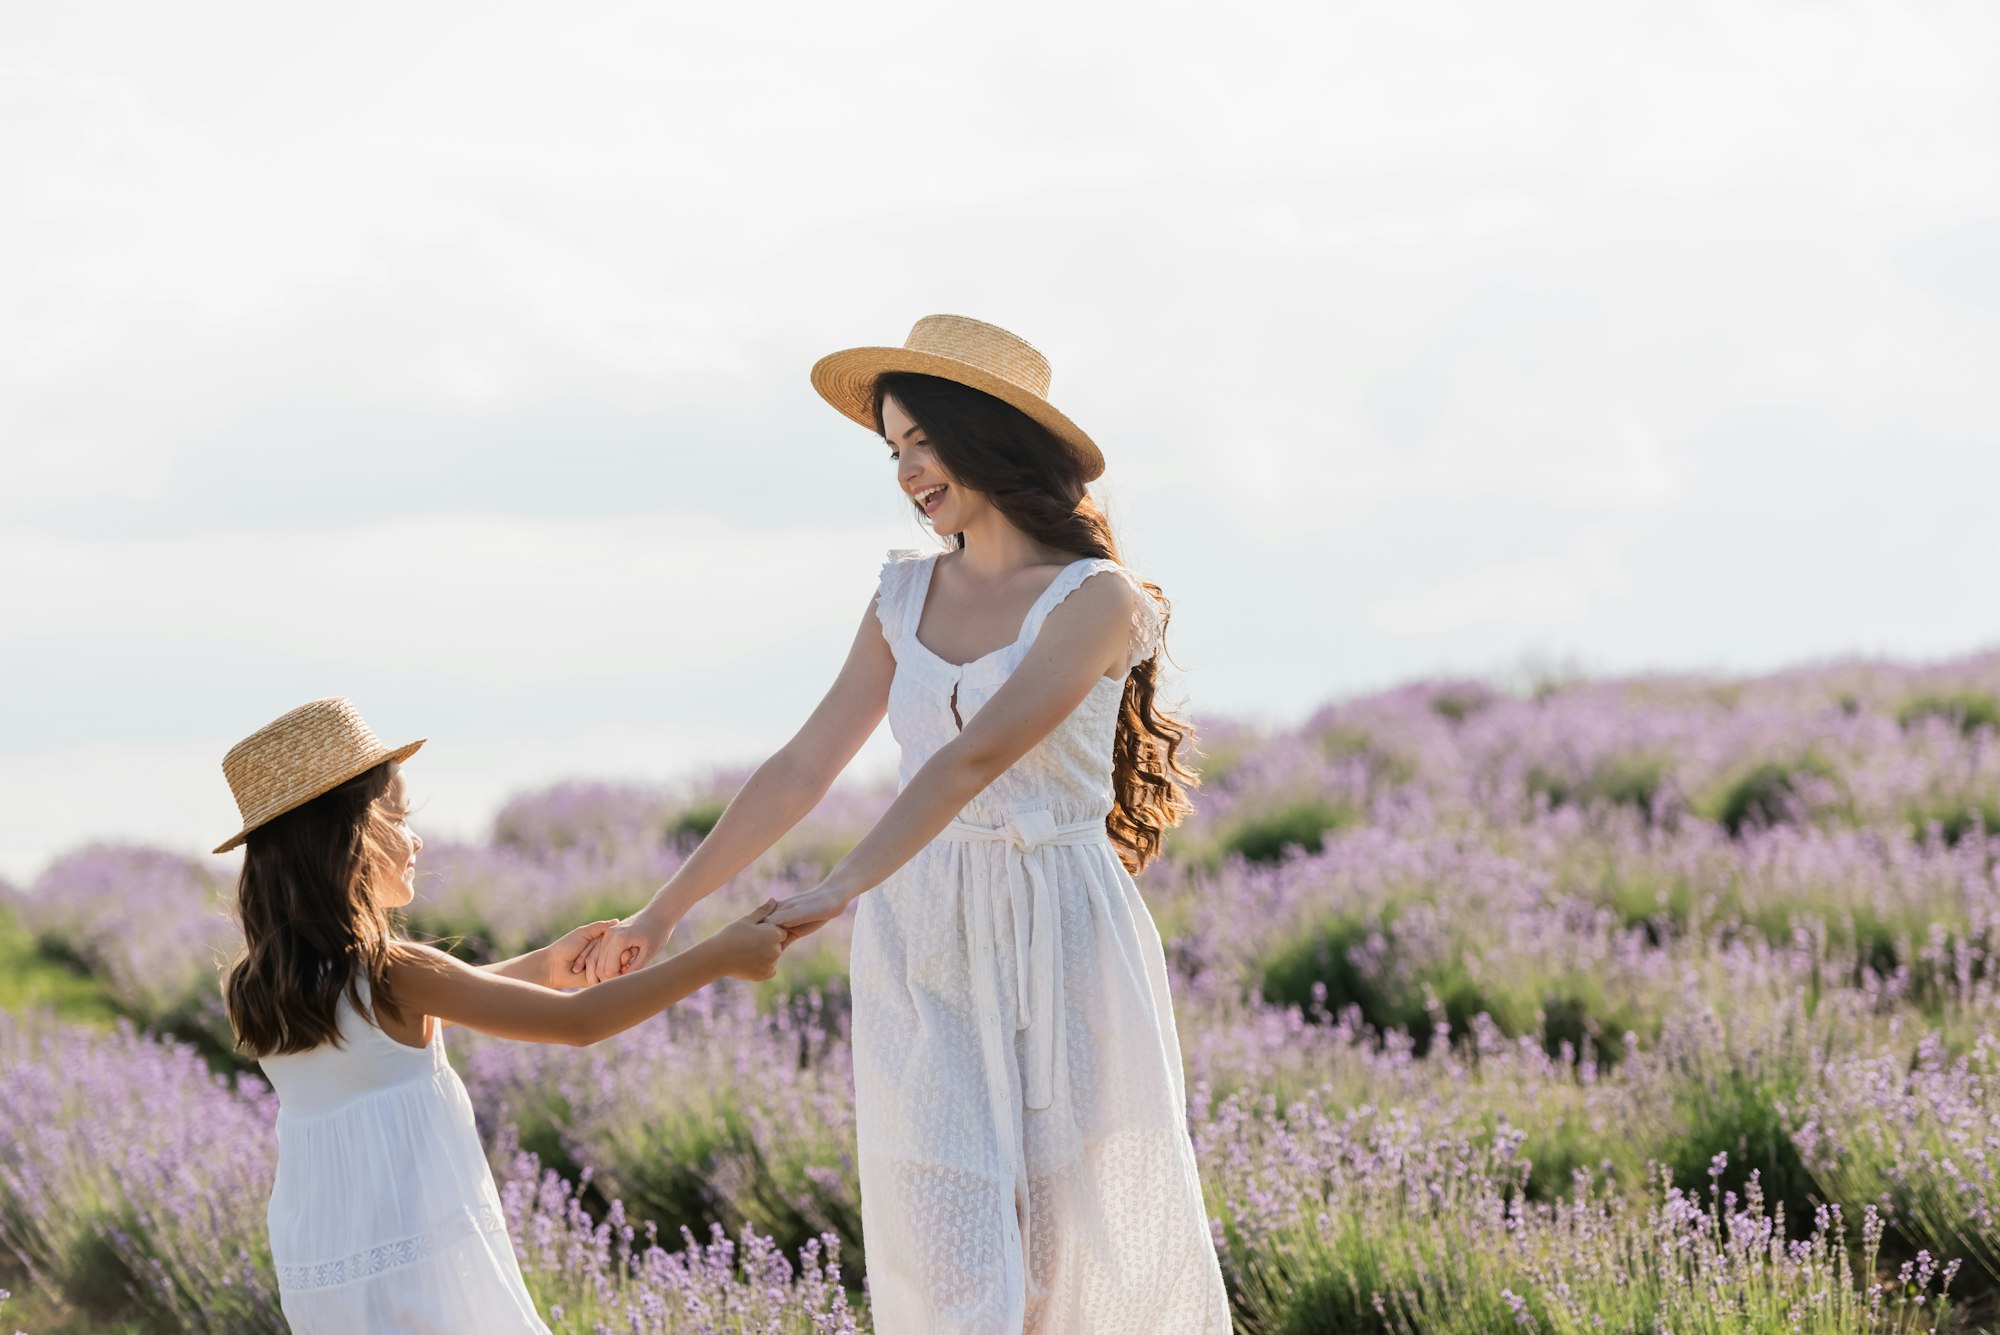 joyful mom and daughter in straw hats holding hands while having fun in field